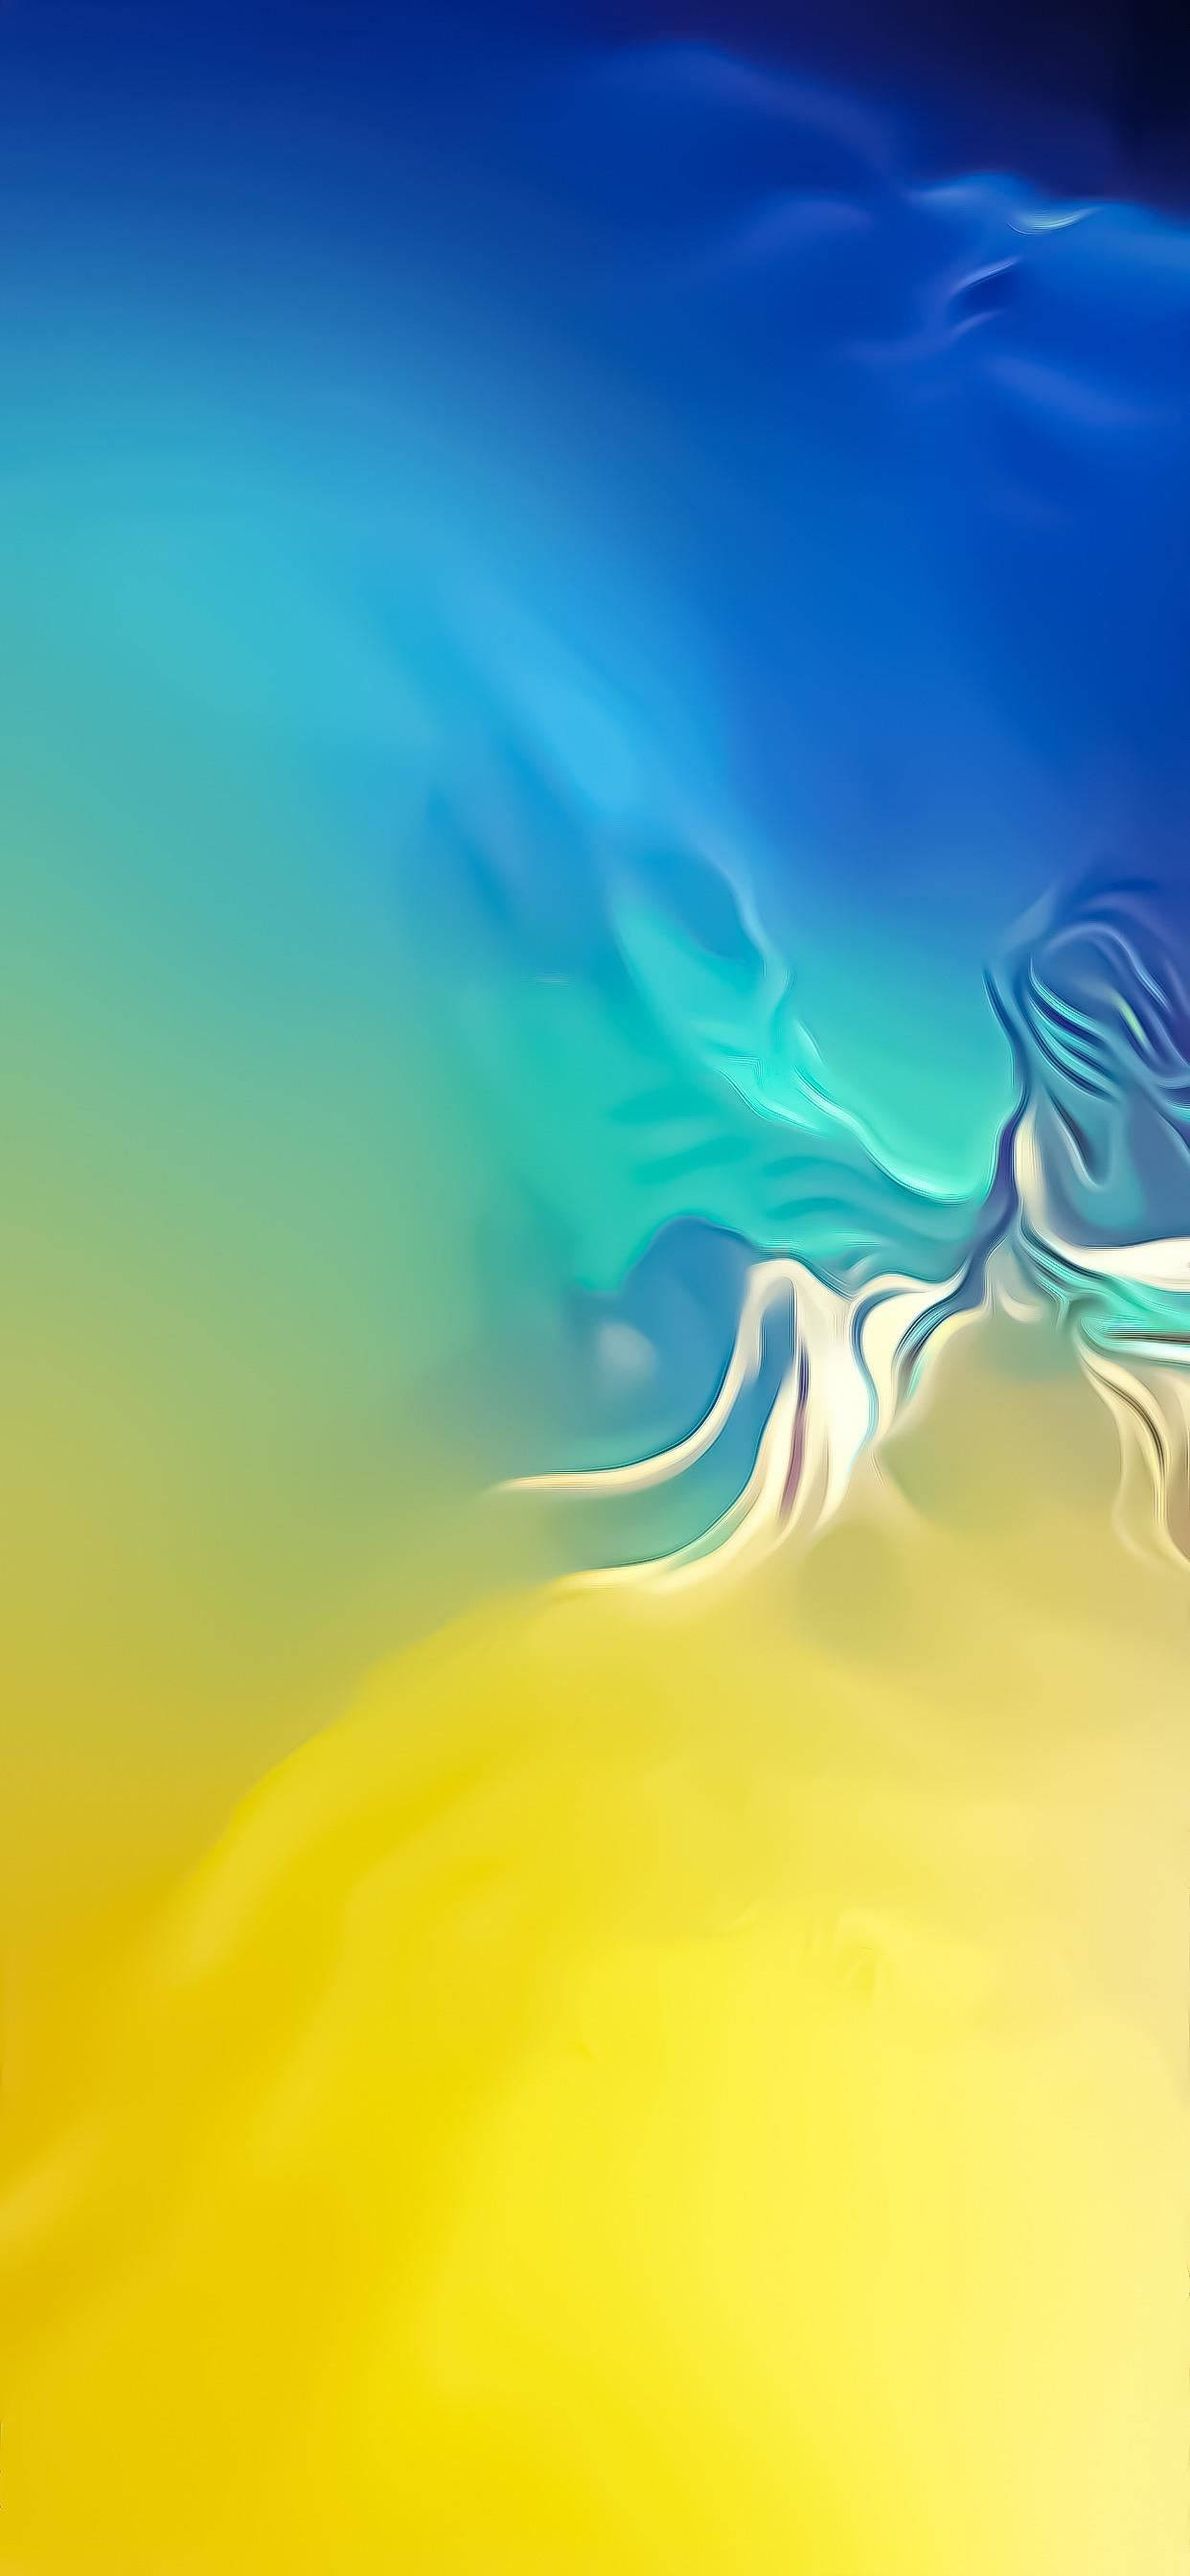 Download Yellow And Teal Abstract Samsung Wallpaper 